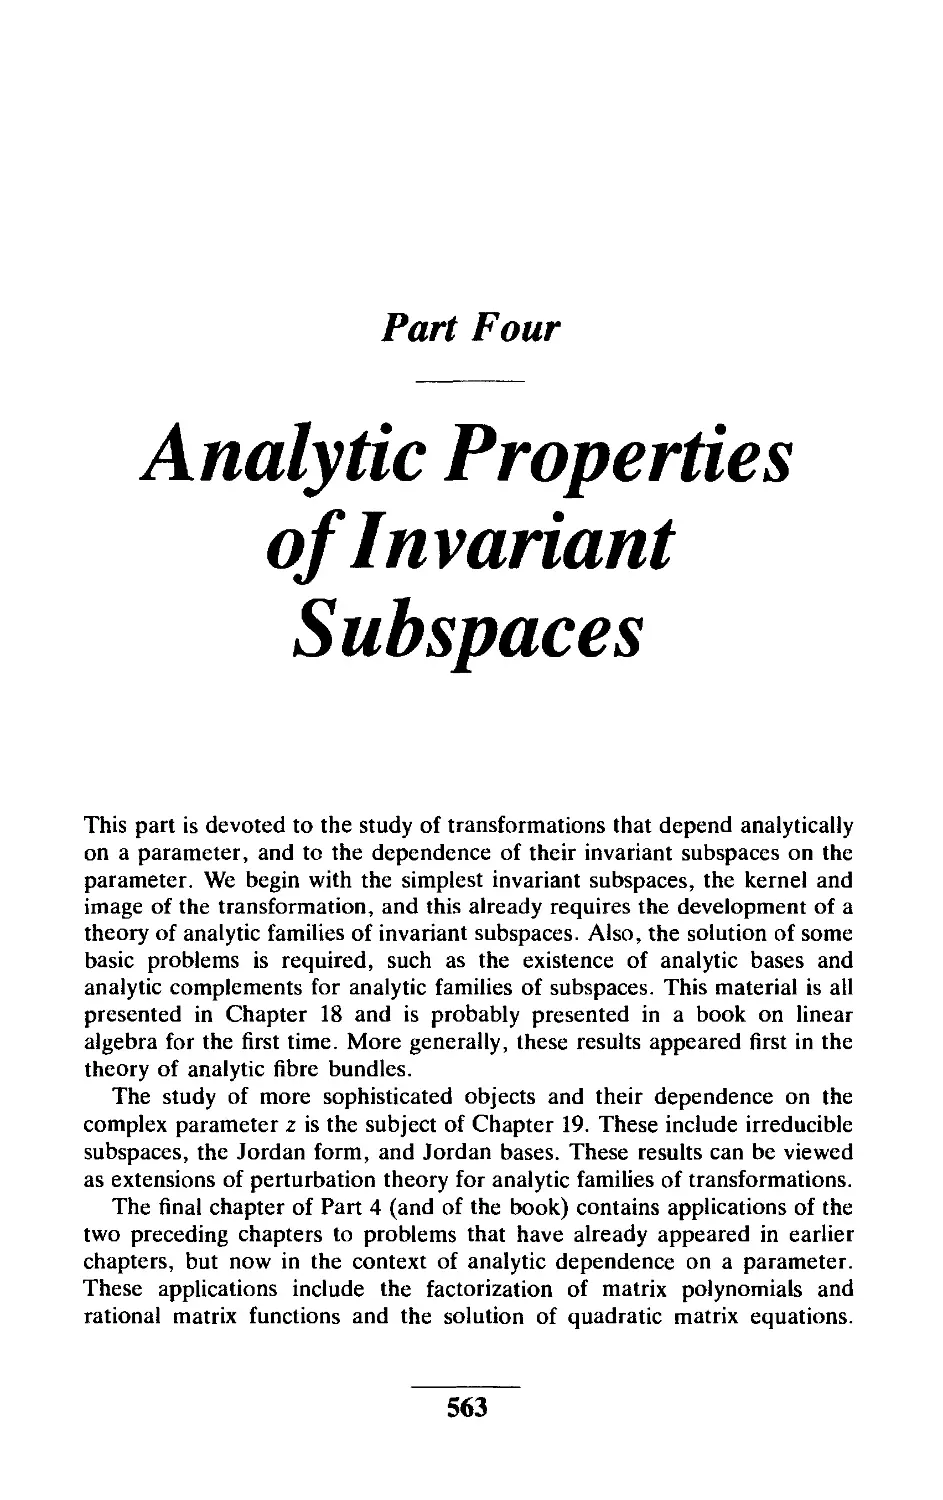 Part Four Analytic Properties of Invariant Subspaces